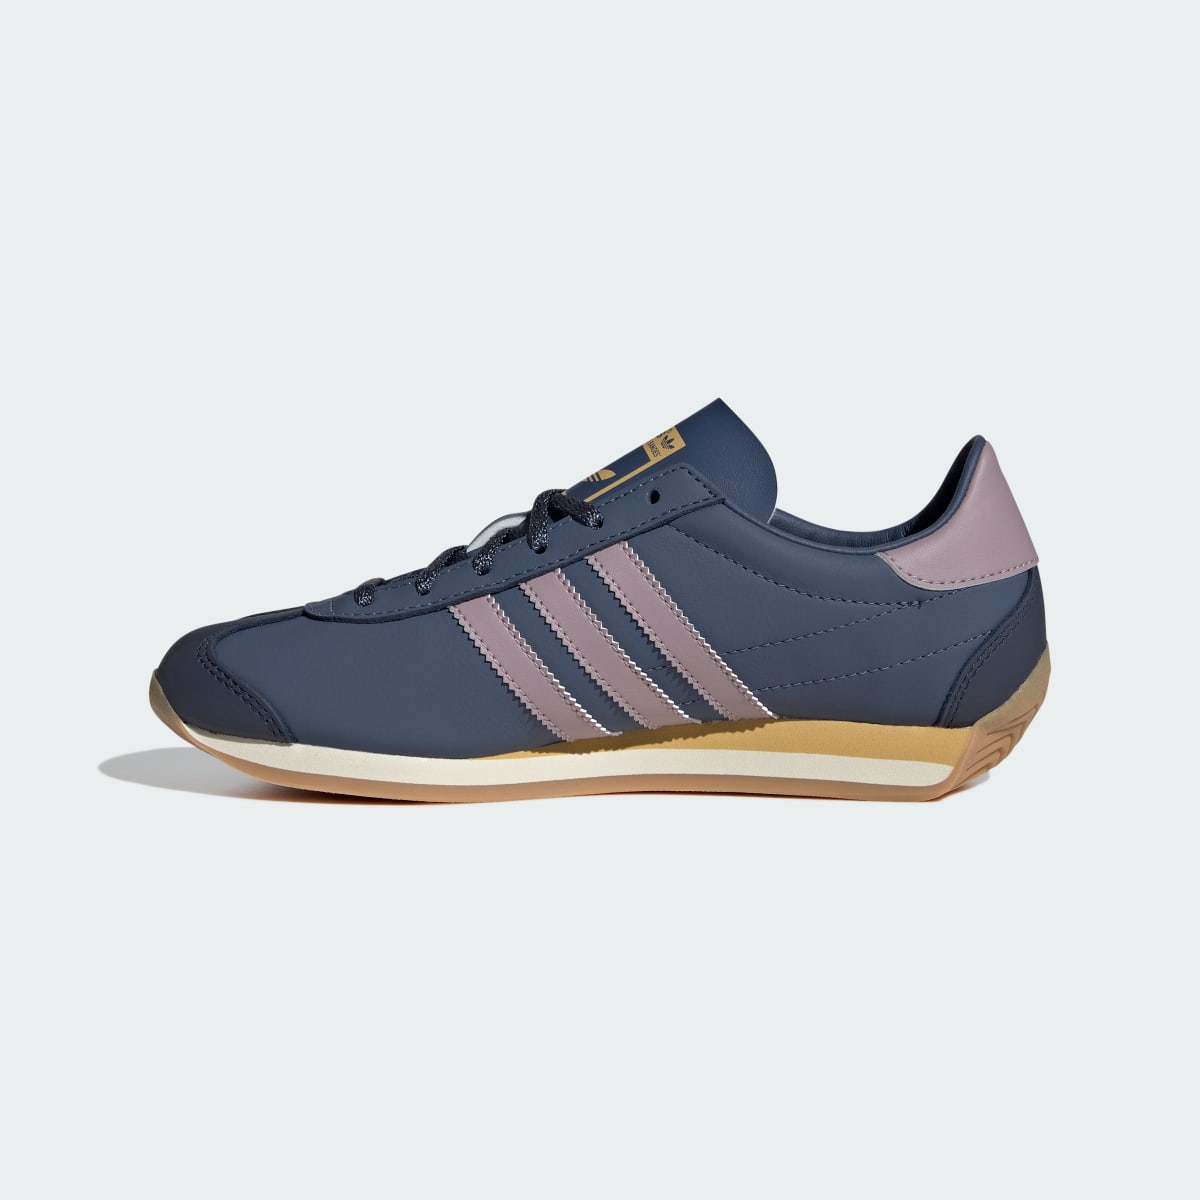 Adidas Country OG Shoes. 7